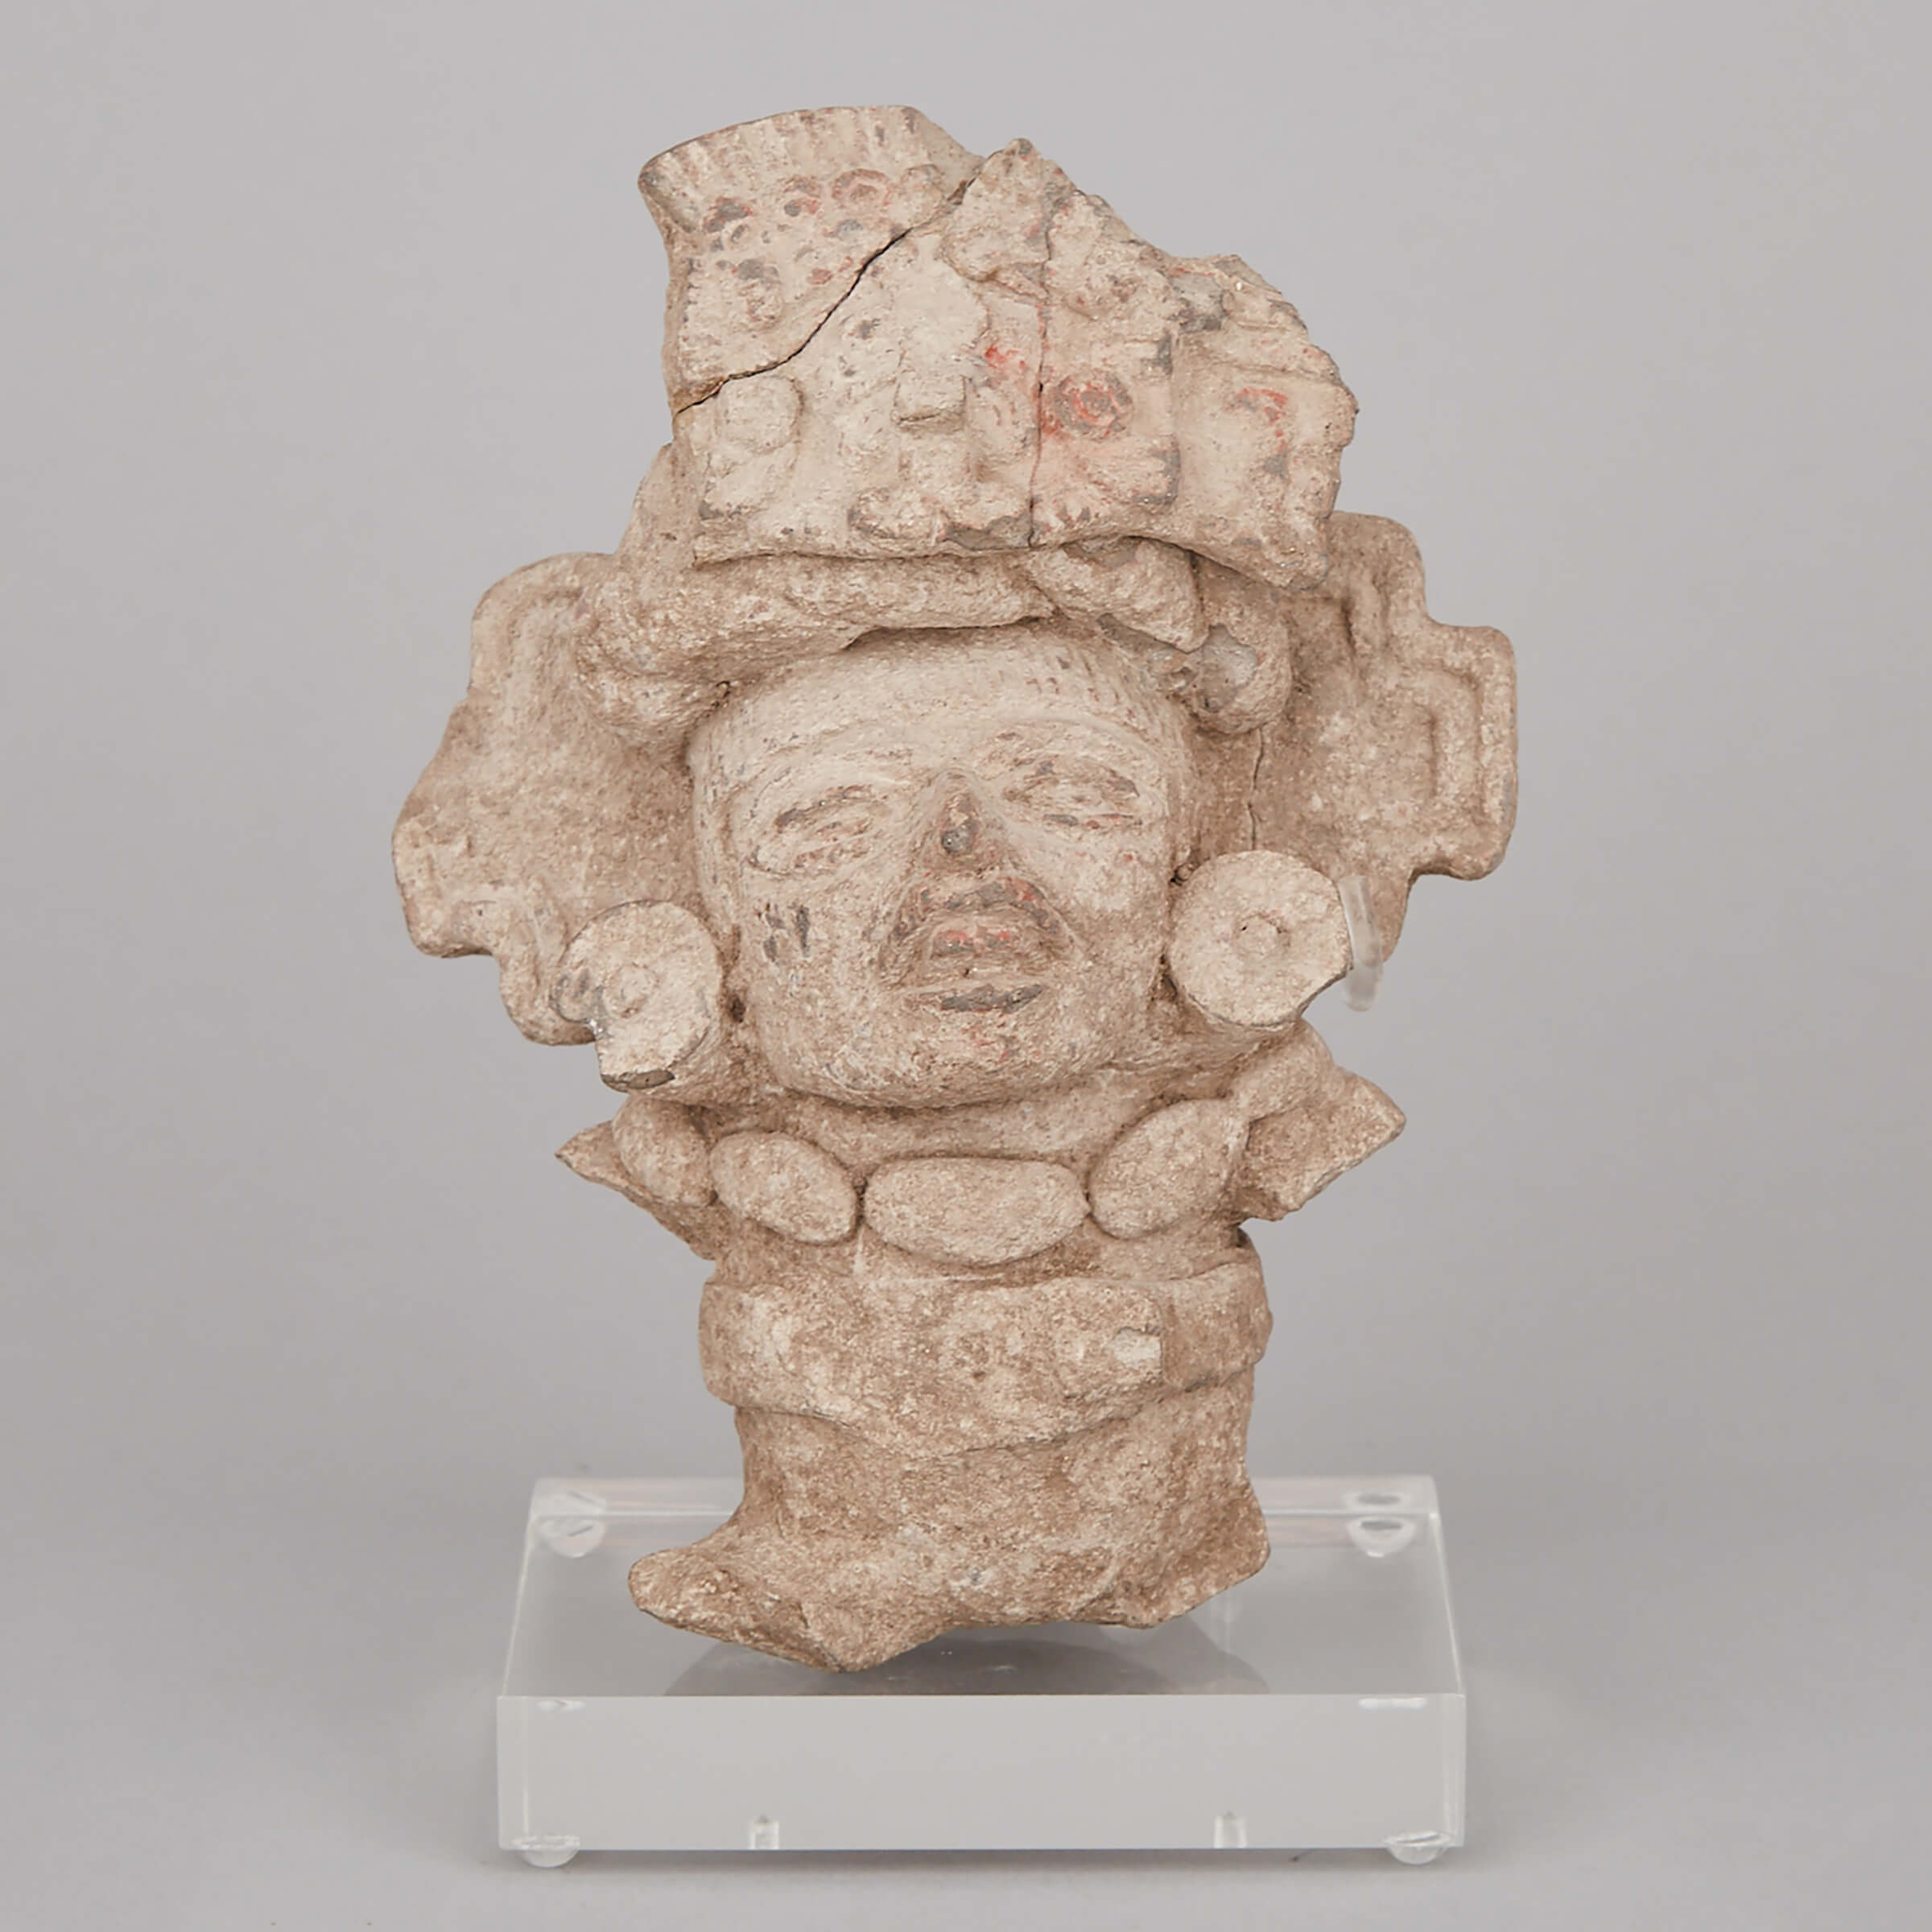 Zapotec or Mayan Terracotta Figure, Southern Mexico, 400-700AD